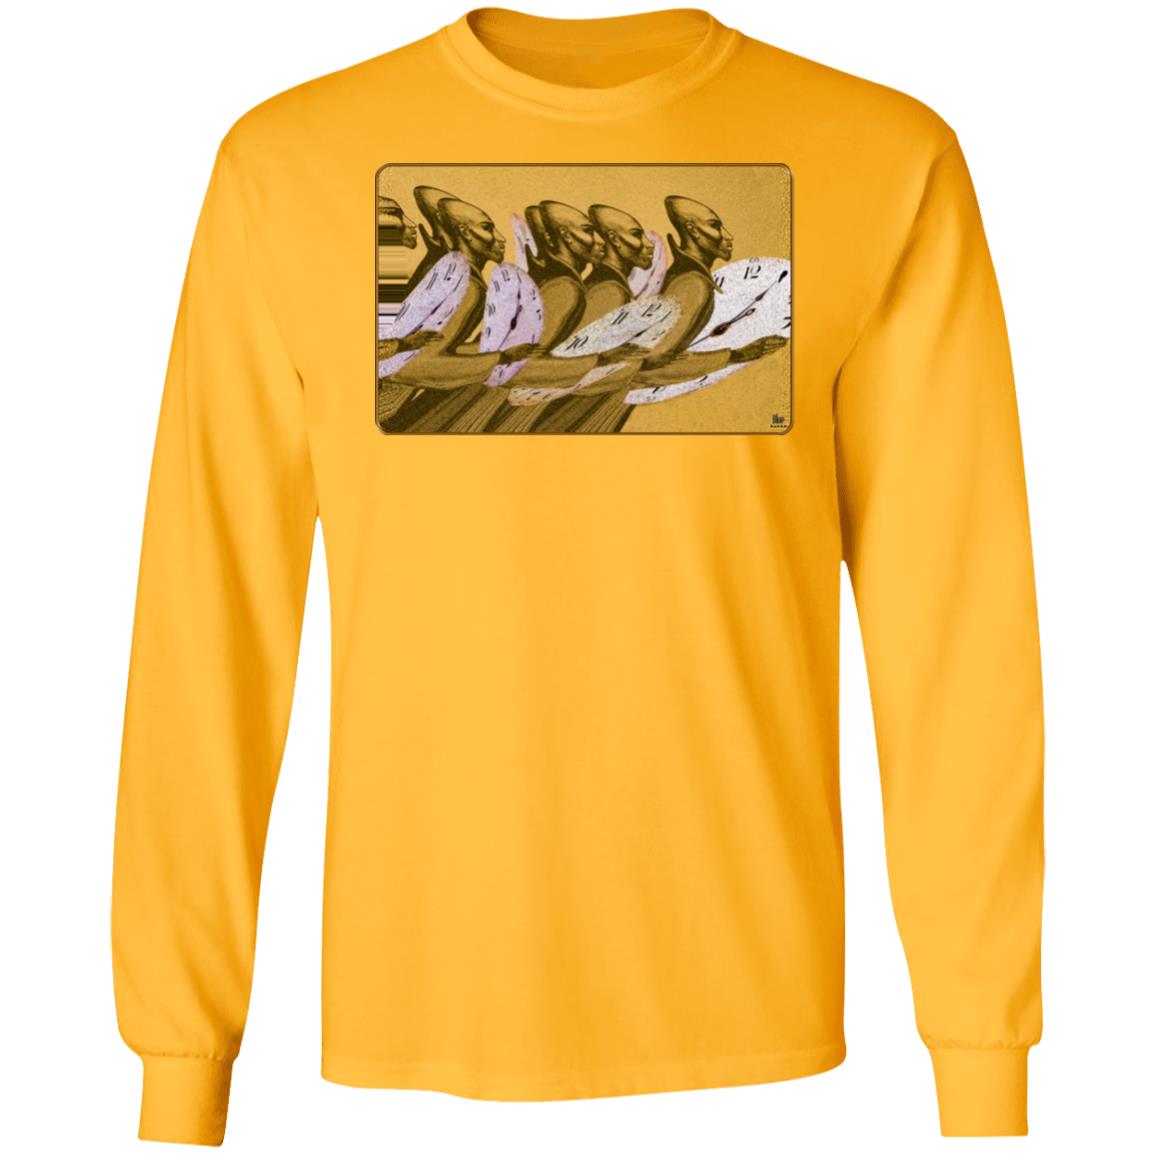 Time Marching On - Gold - Men's Long Sleeve T-Shirt